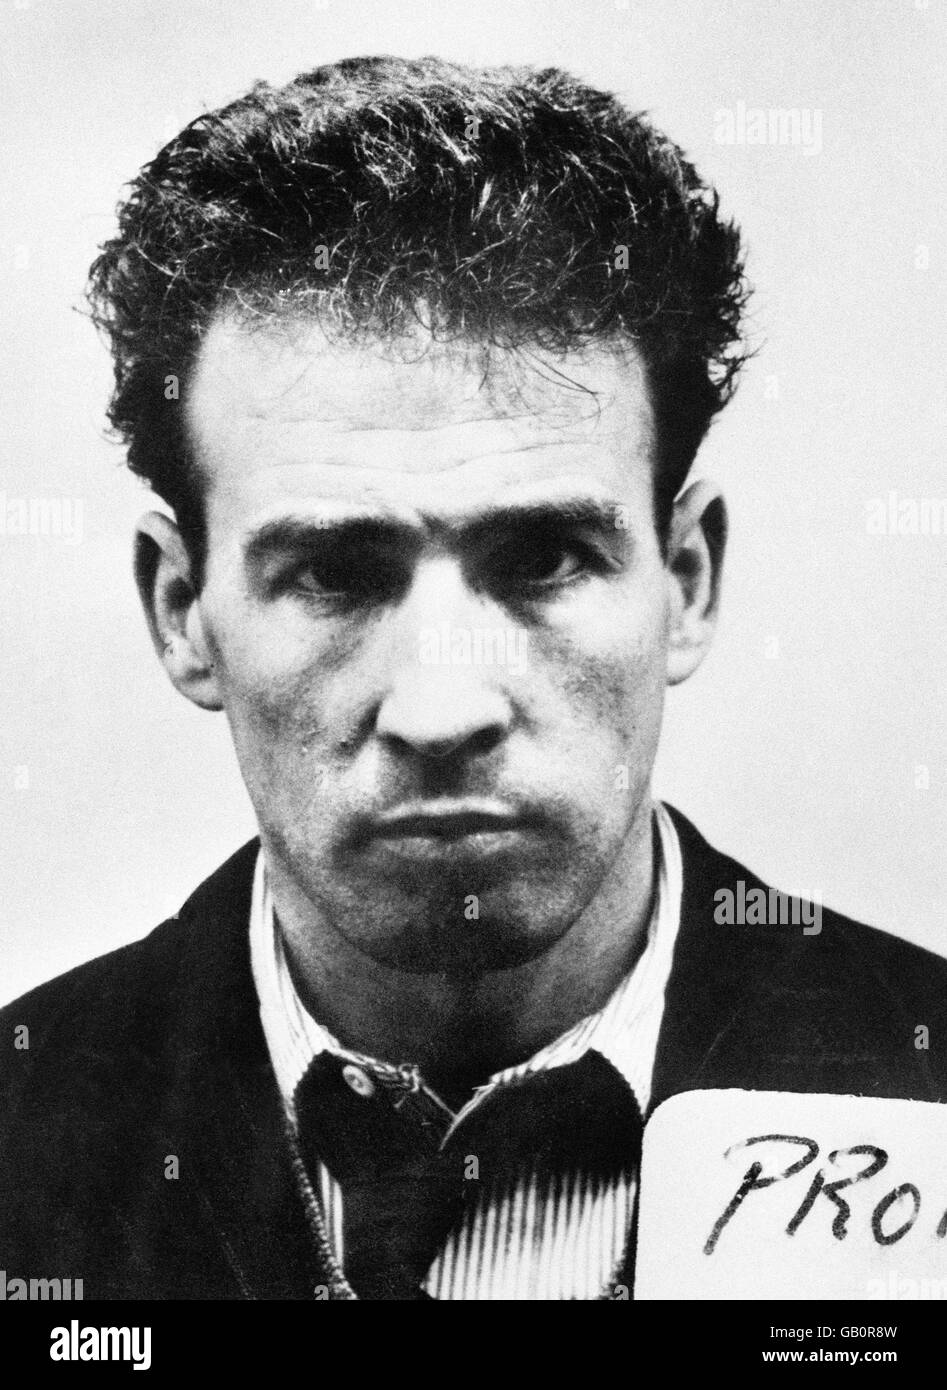 British Crime - Prisons - Escaped Prisoners - Walter 'Angel Face' Probyn - Dartmoor - 1964. Walter 'Angel Face' Probyn, who escaped from an outside working party at Dartmoor Prison, Devon. Stock Photo